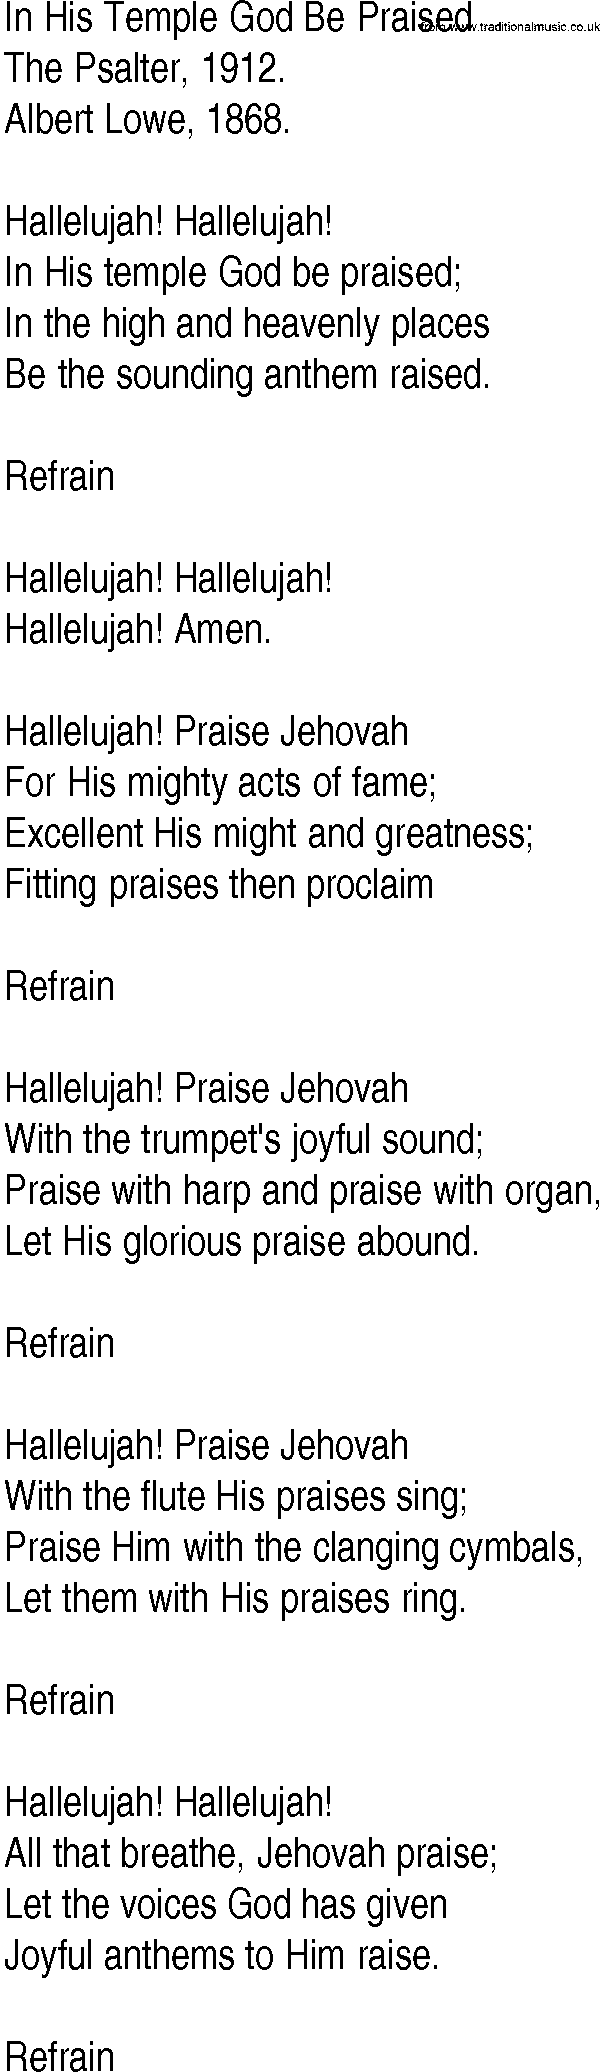 Hymn and Gospel Song: In His Temple God Be Praised by The Psalter lyrics